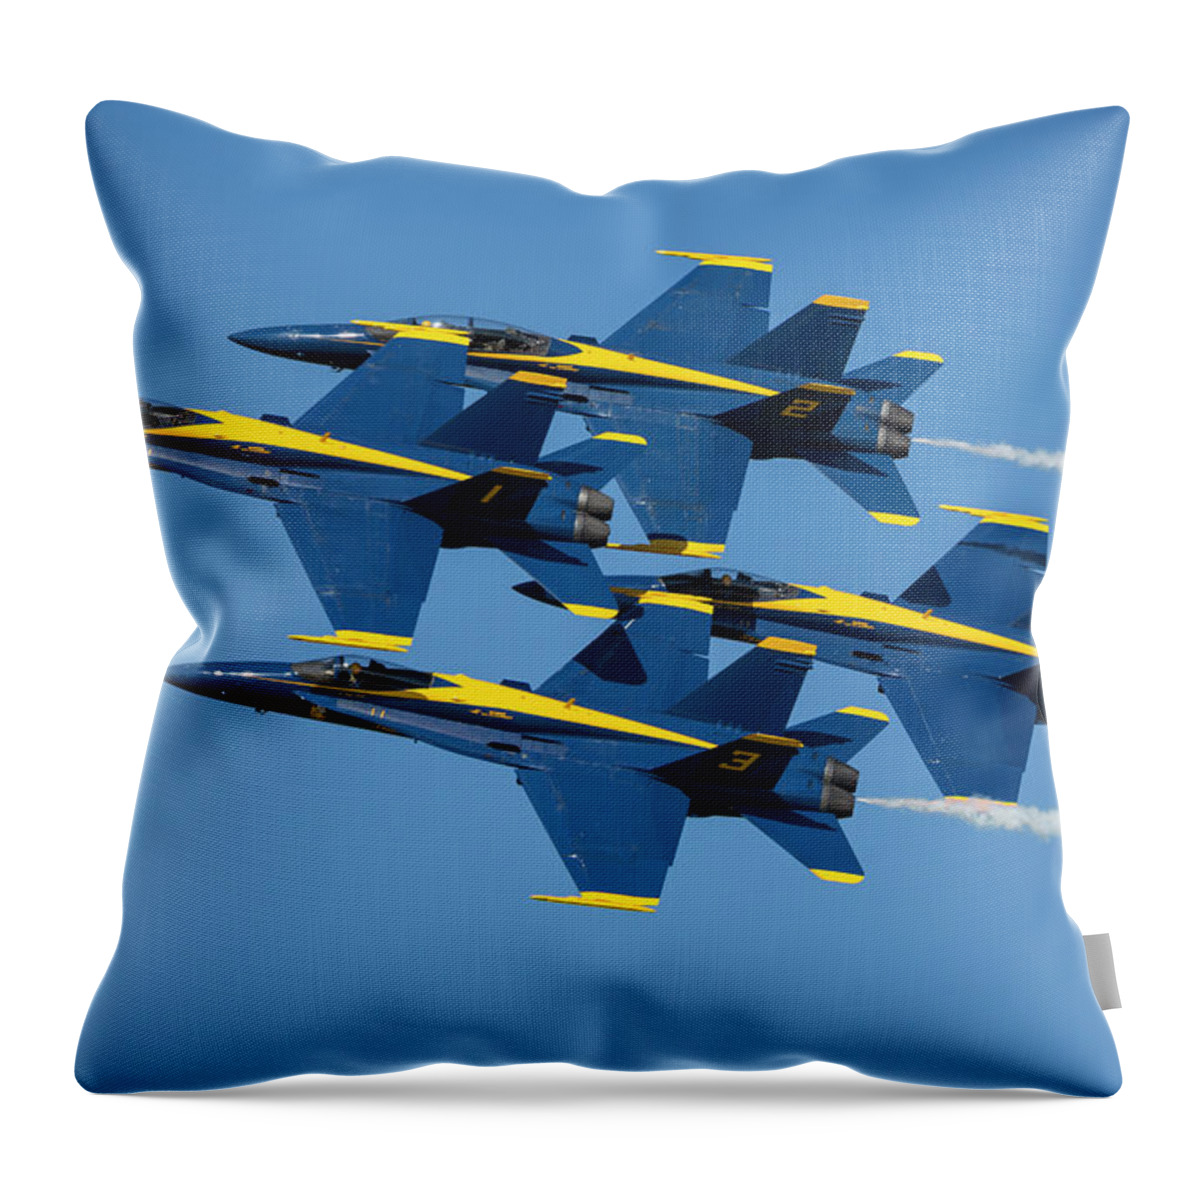 3scape Throw Pillow featuring the photograph Blue Angels Diamond Formation by Adam Romanowicz